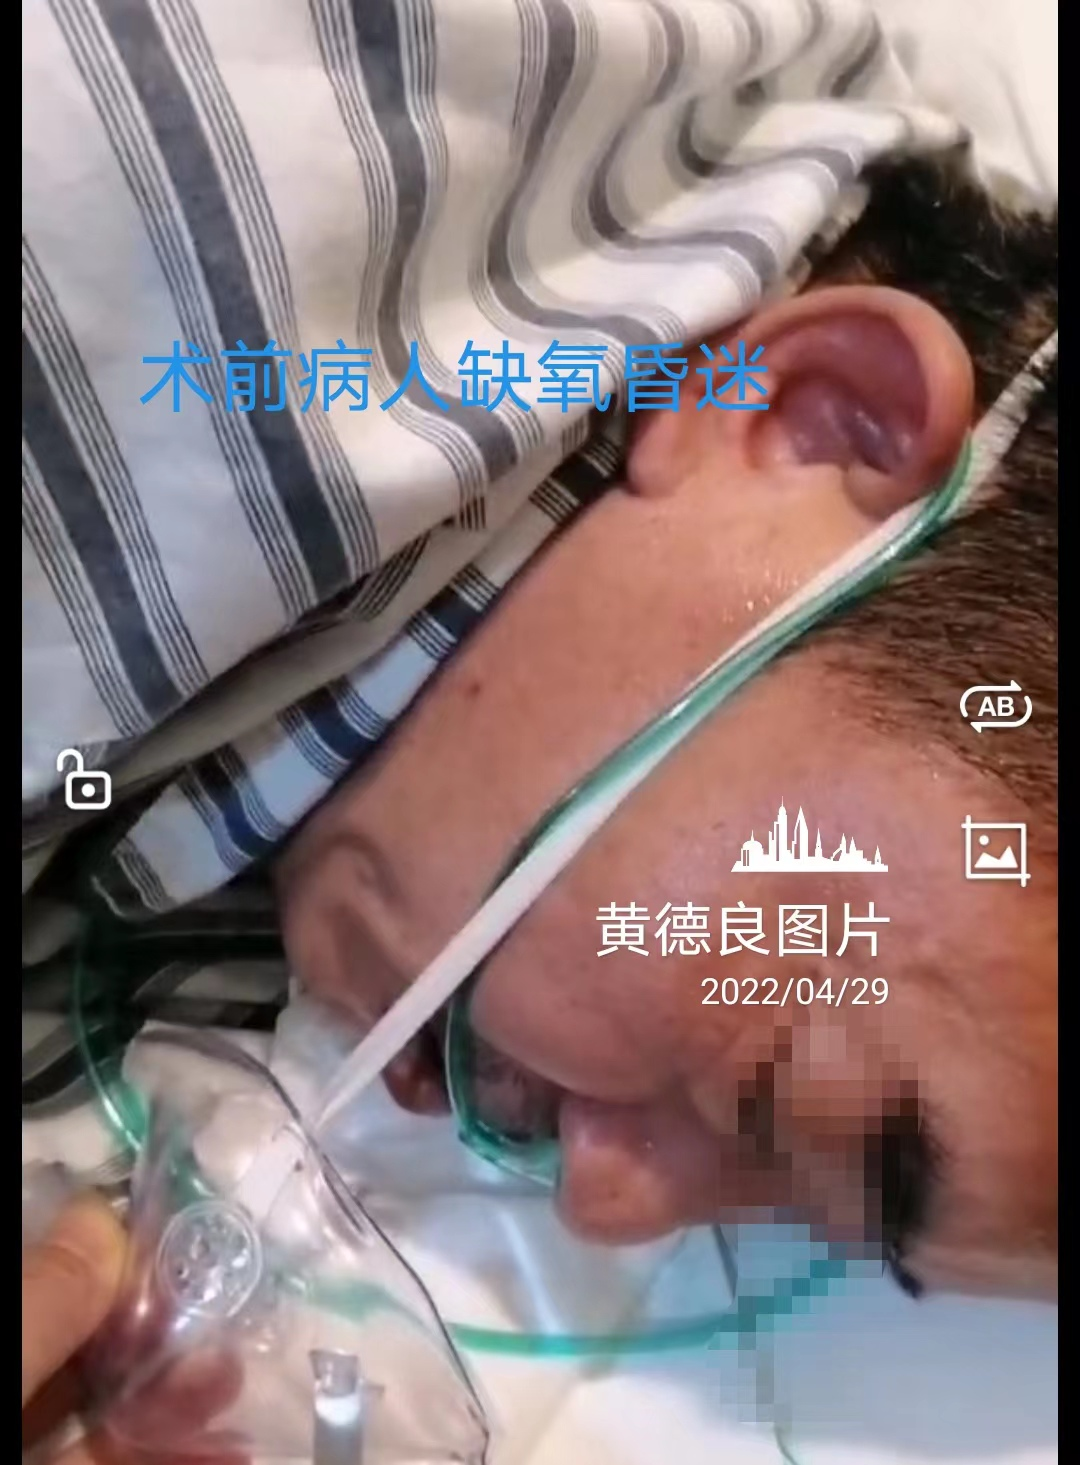 Patient in coma before surgery